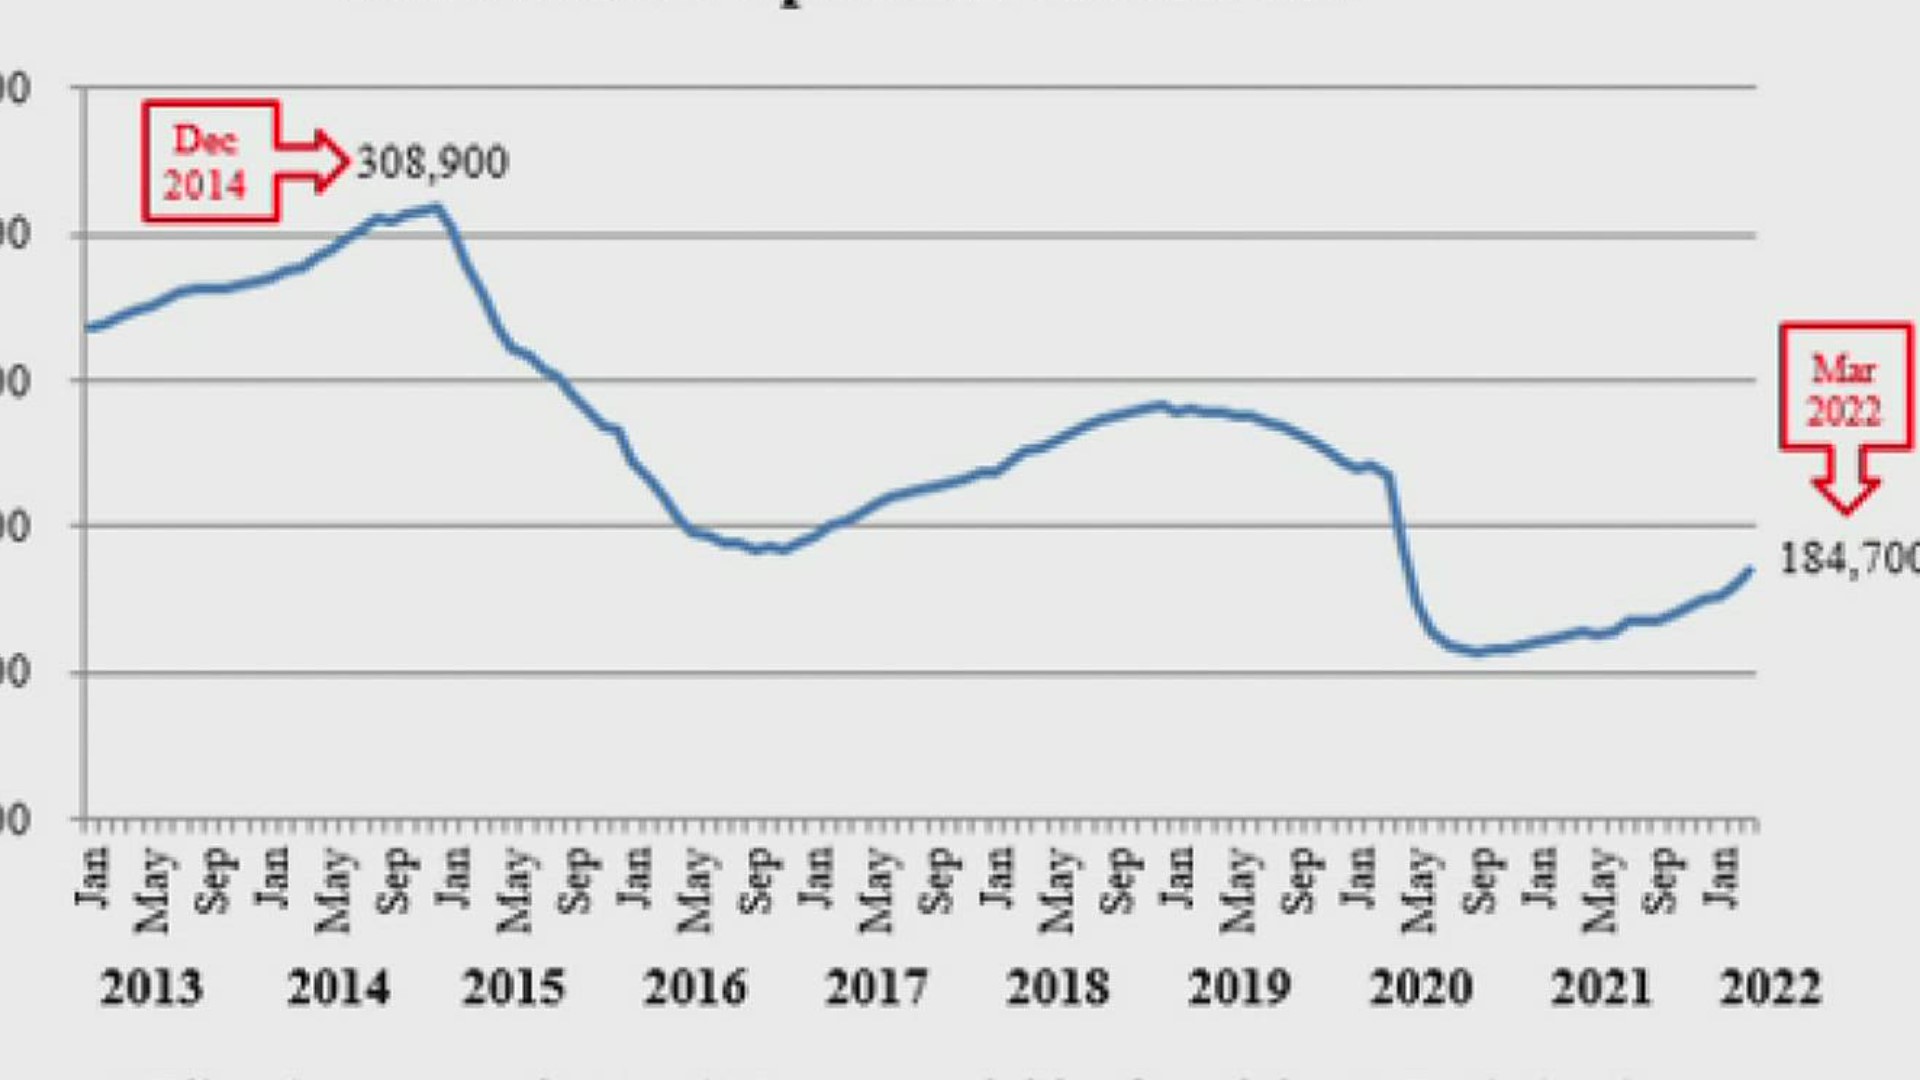 According to analysis by both TXOGA and The Texas Independent Producers and Royalty Owners (TIPRO), upstream oil and gas industry jobs grew by 4,300 in March.